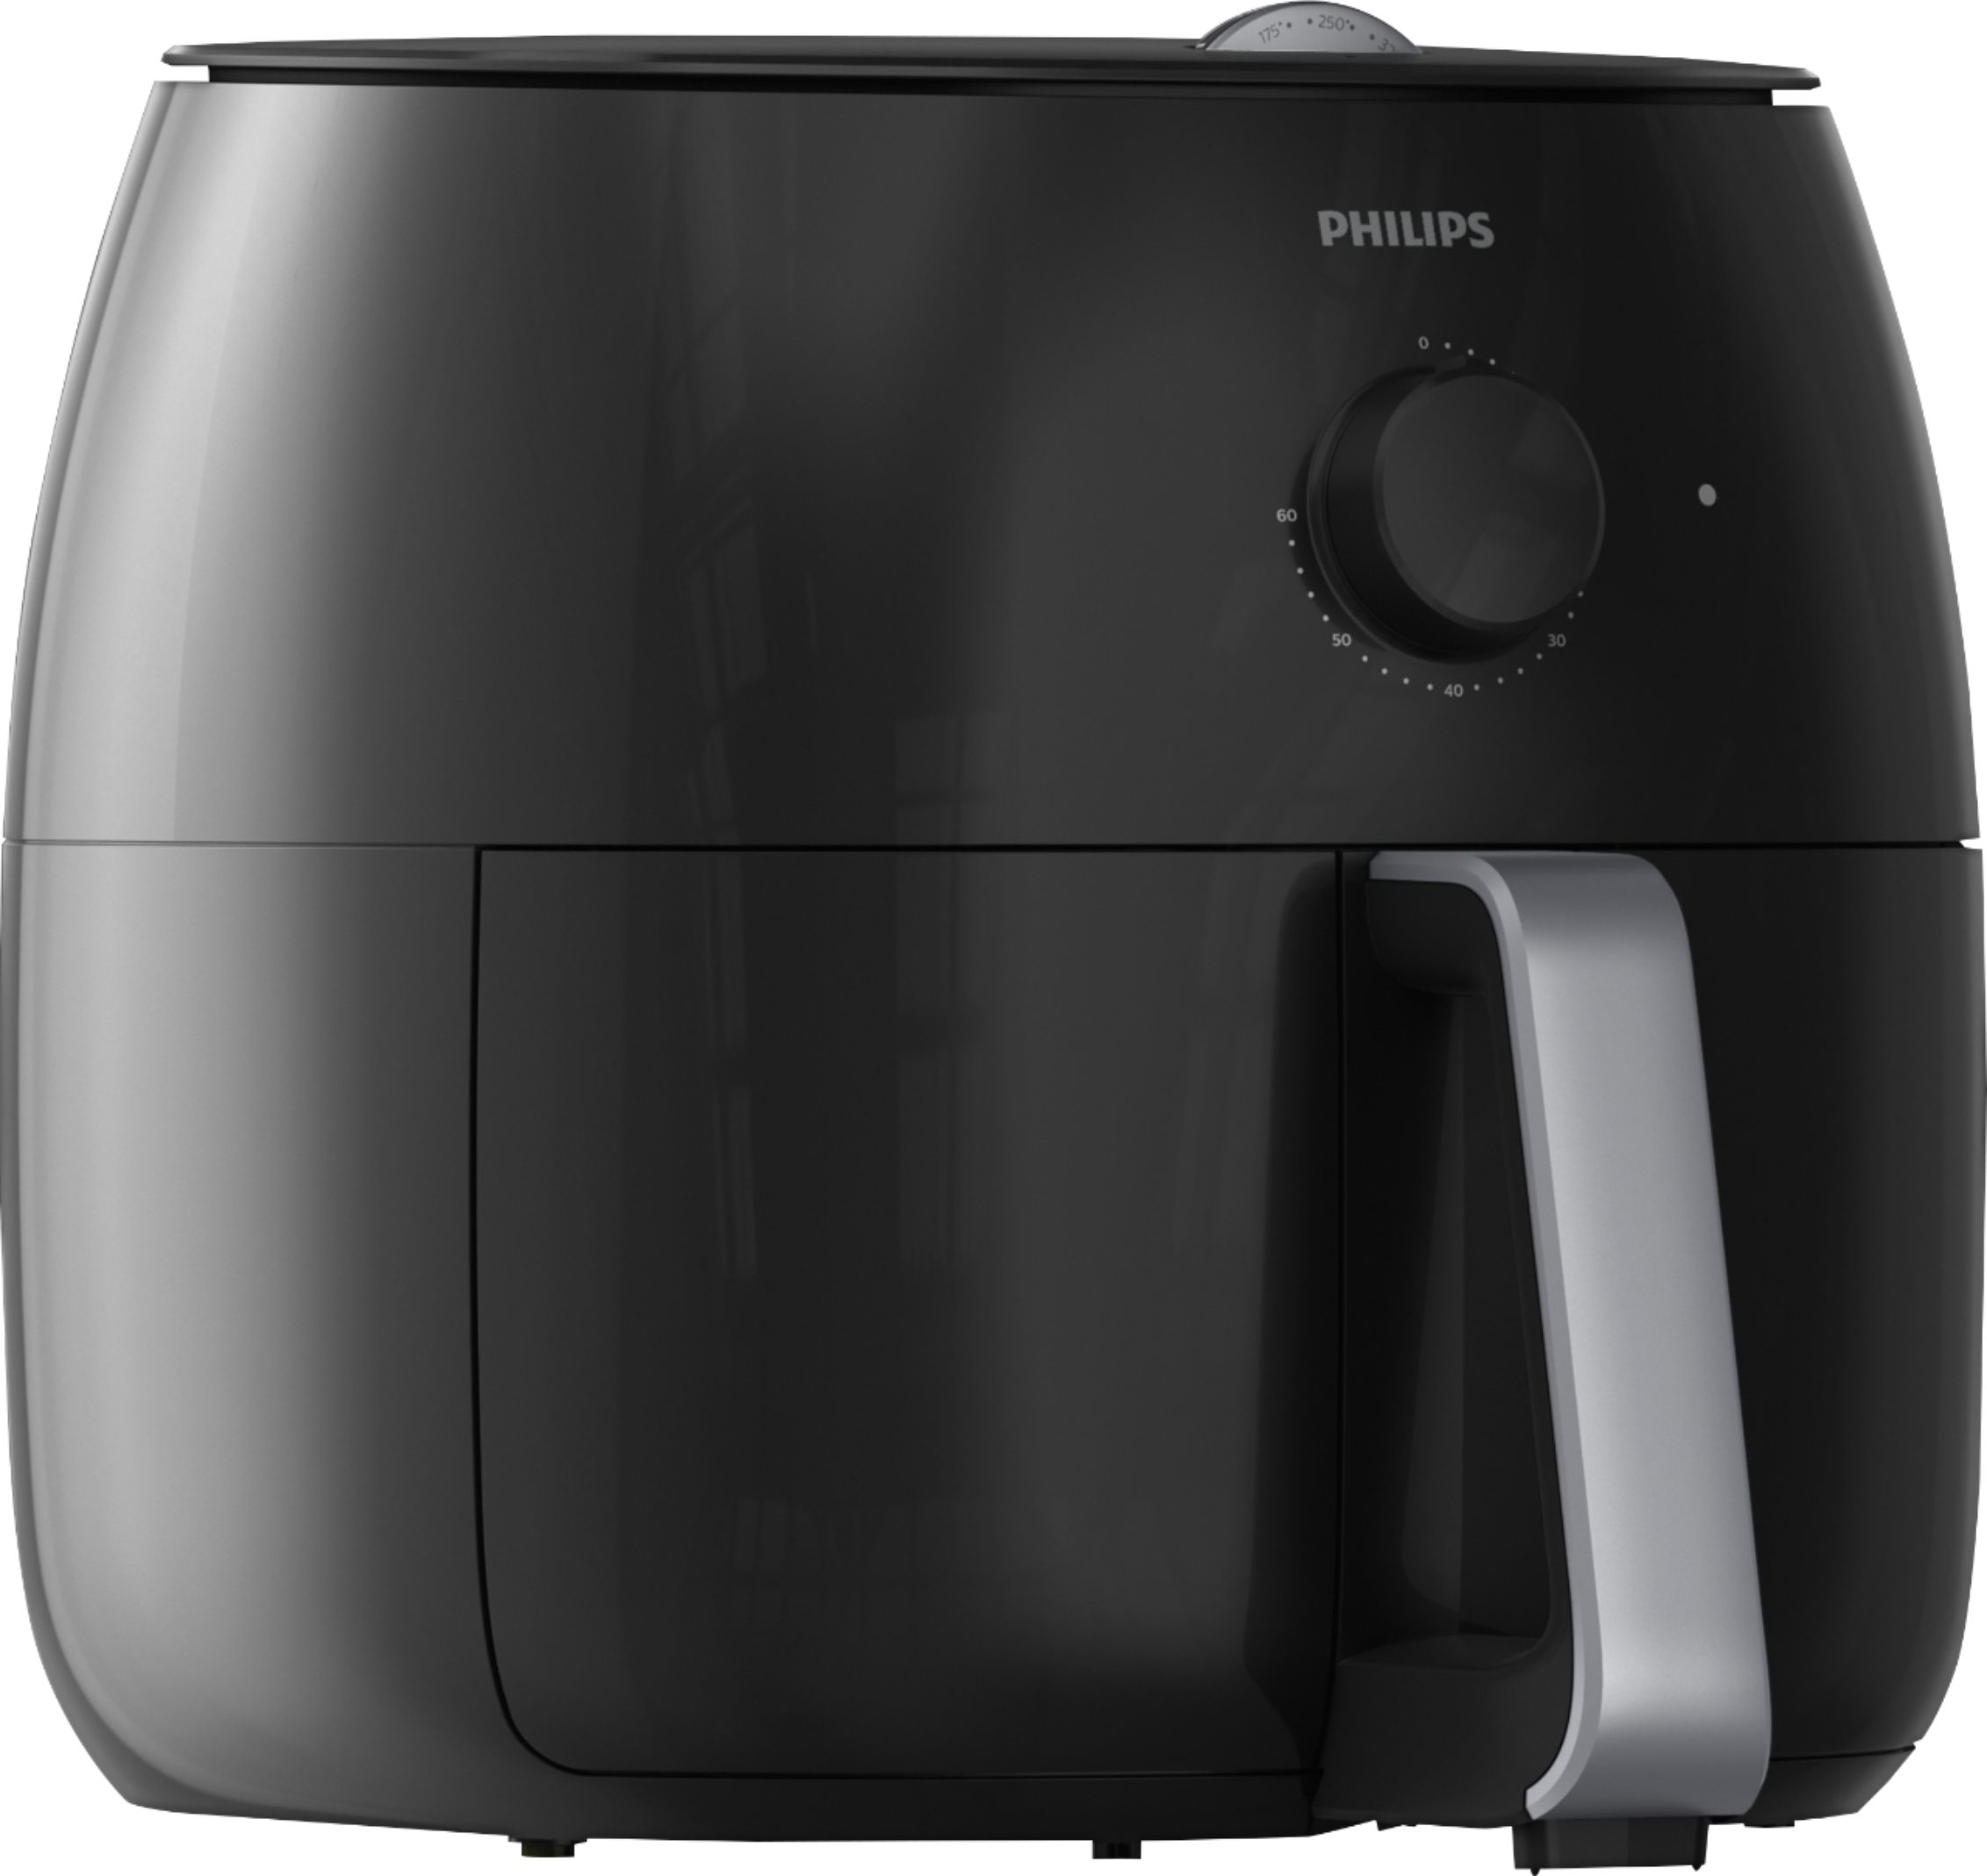 Philips Avance Collection Airfryer XXL, Twin TurboStar with Fat Removal Technology- Fry healthy with up to 90% less fat – Black